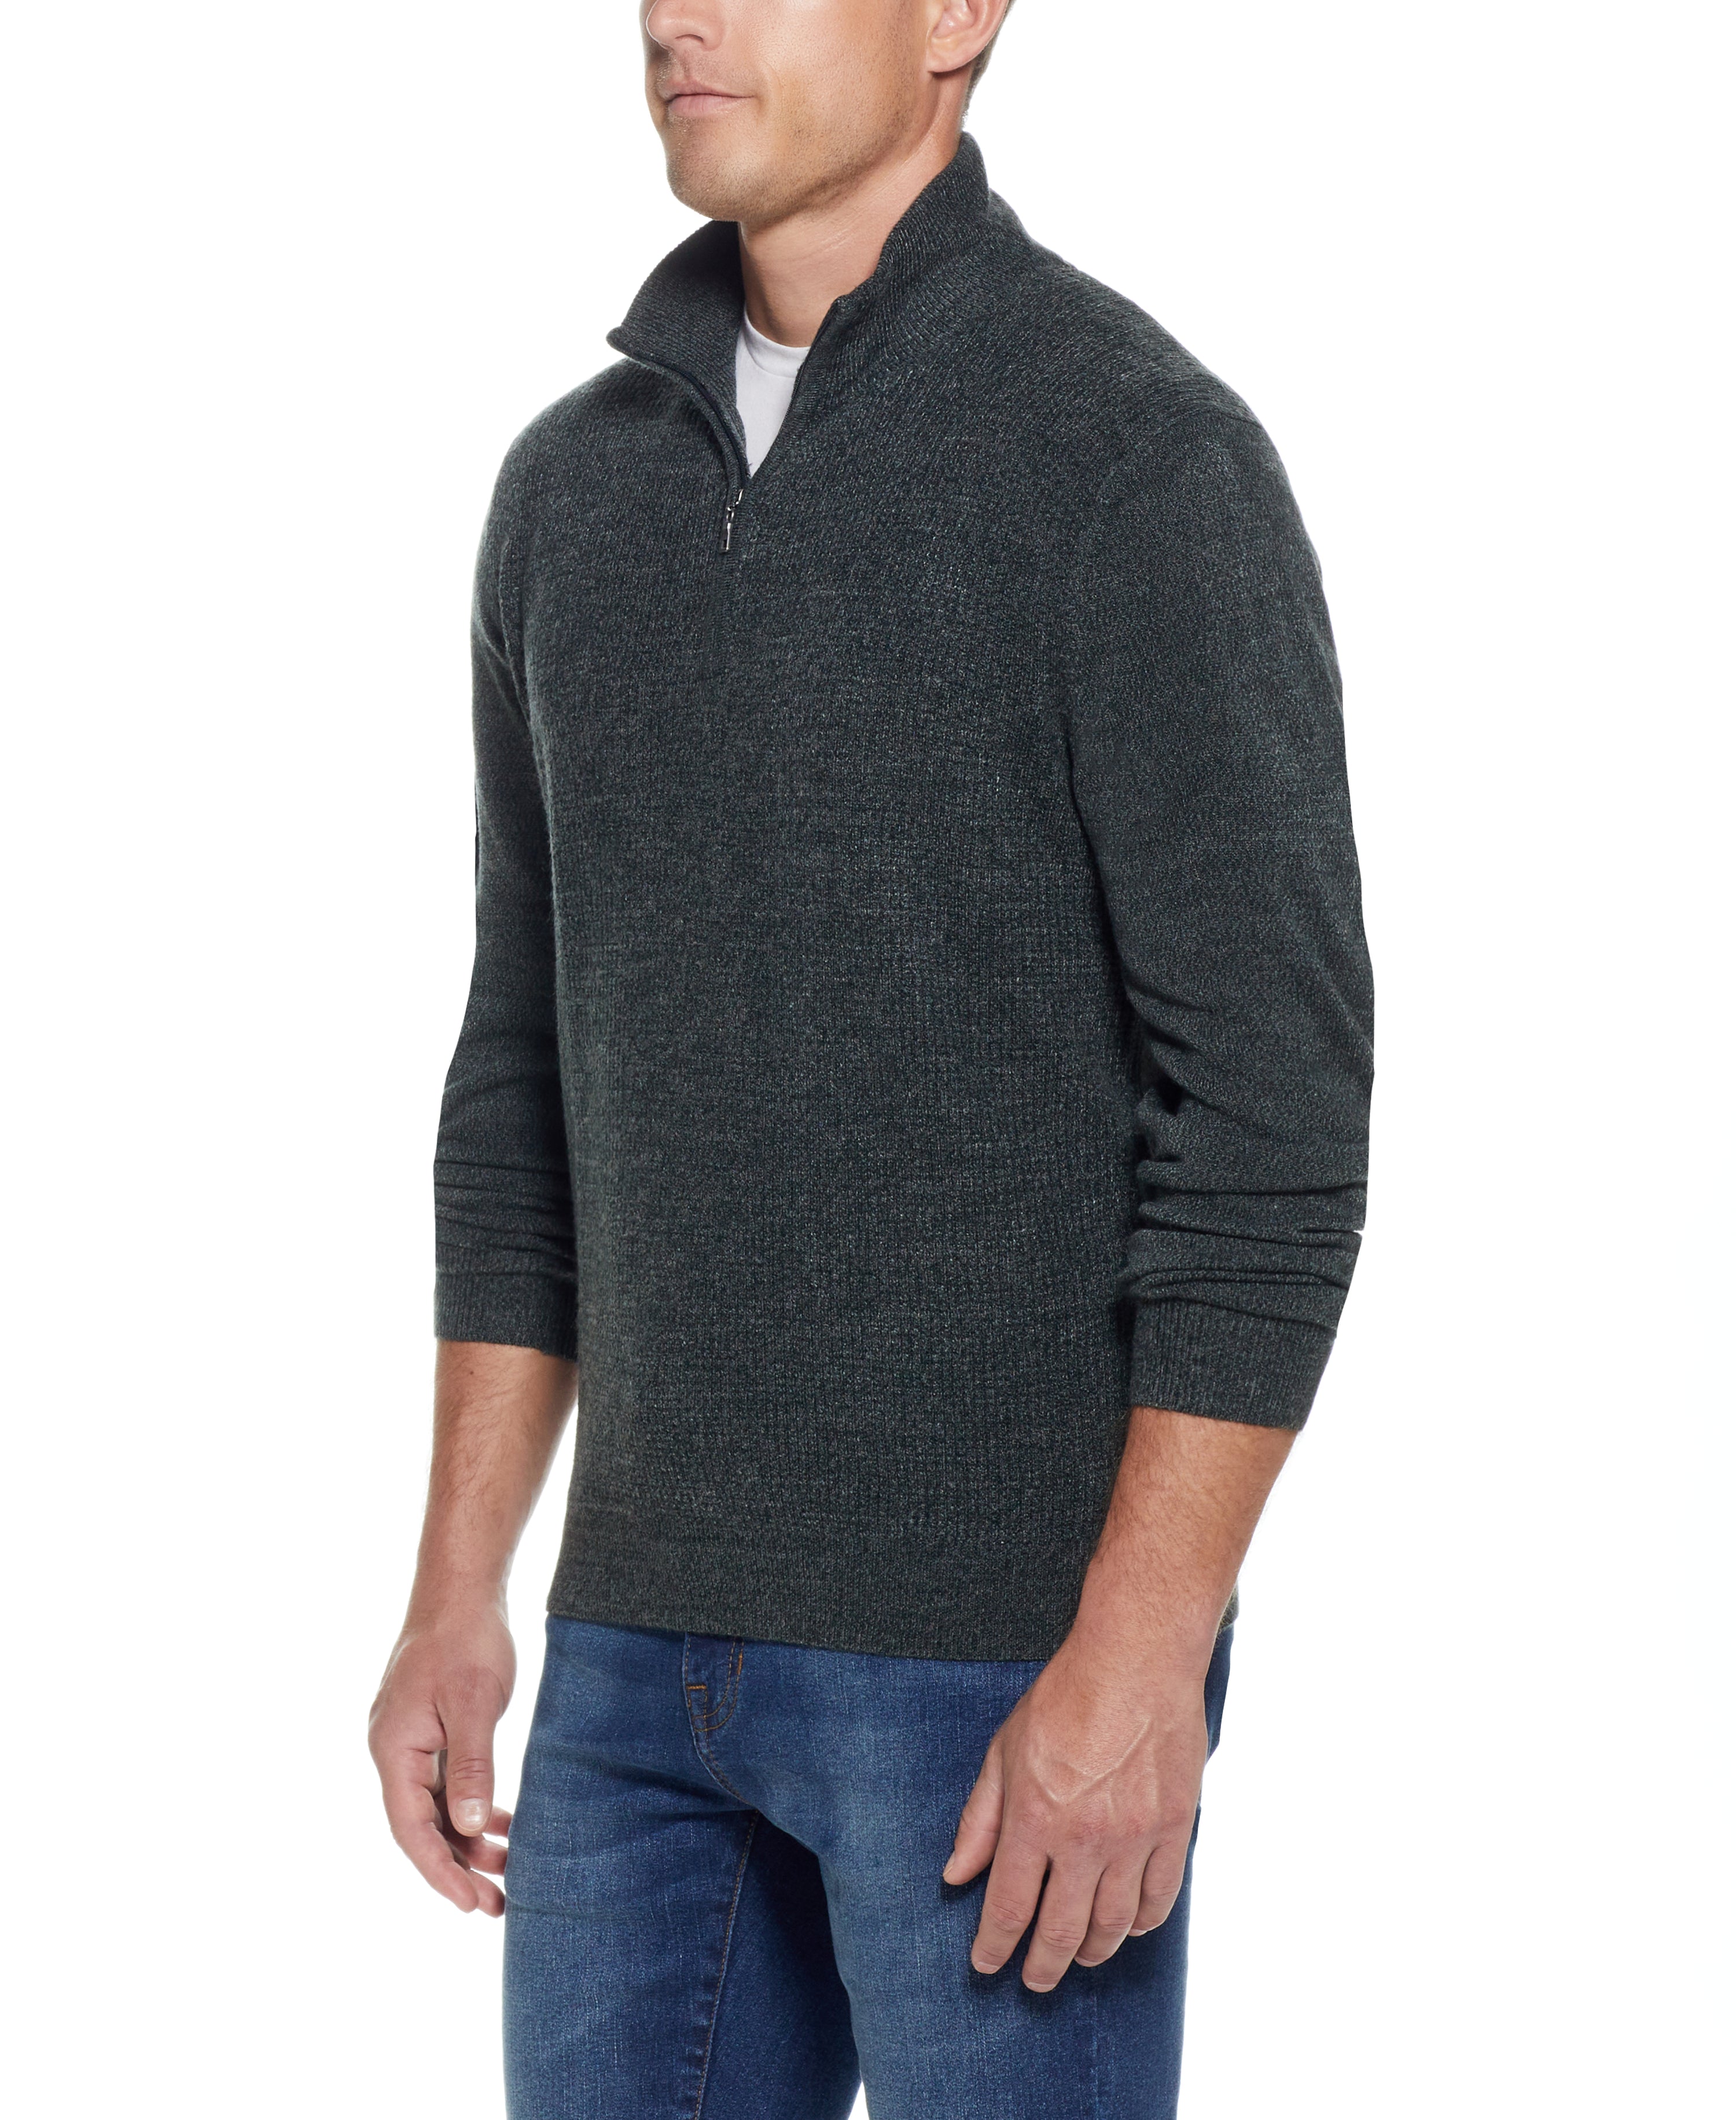 SOFT TOUCH WAFFLE SWEATER 1/4 ZIP in EVERGREEN